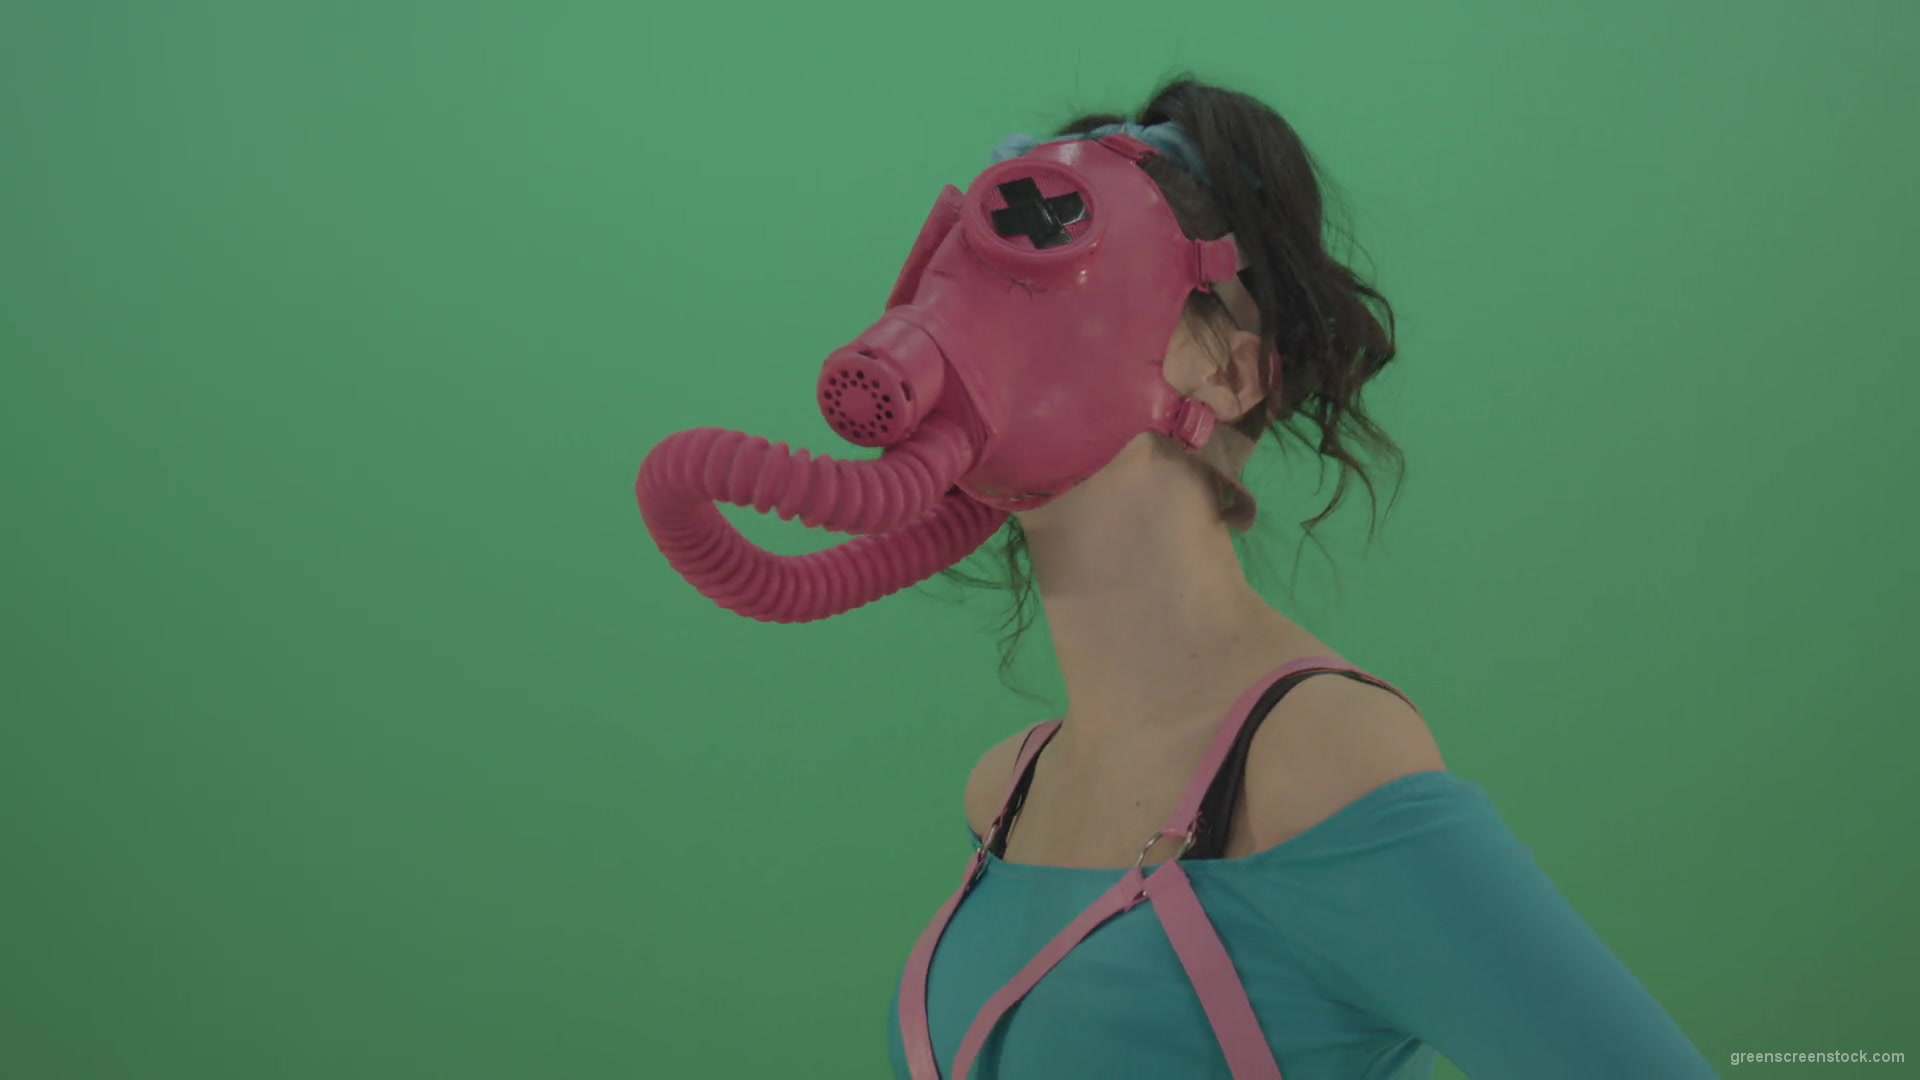 vj video background Pink-head-in-Gas-Mask-moving-Go-Go-Dance-isolated-on-green-screen-4K-Video-Footage-1920_003